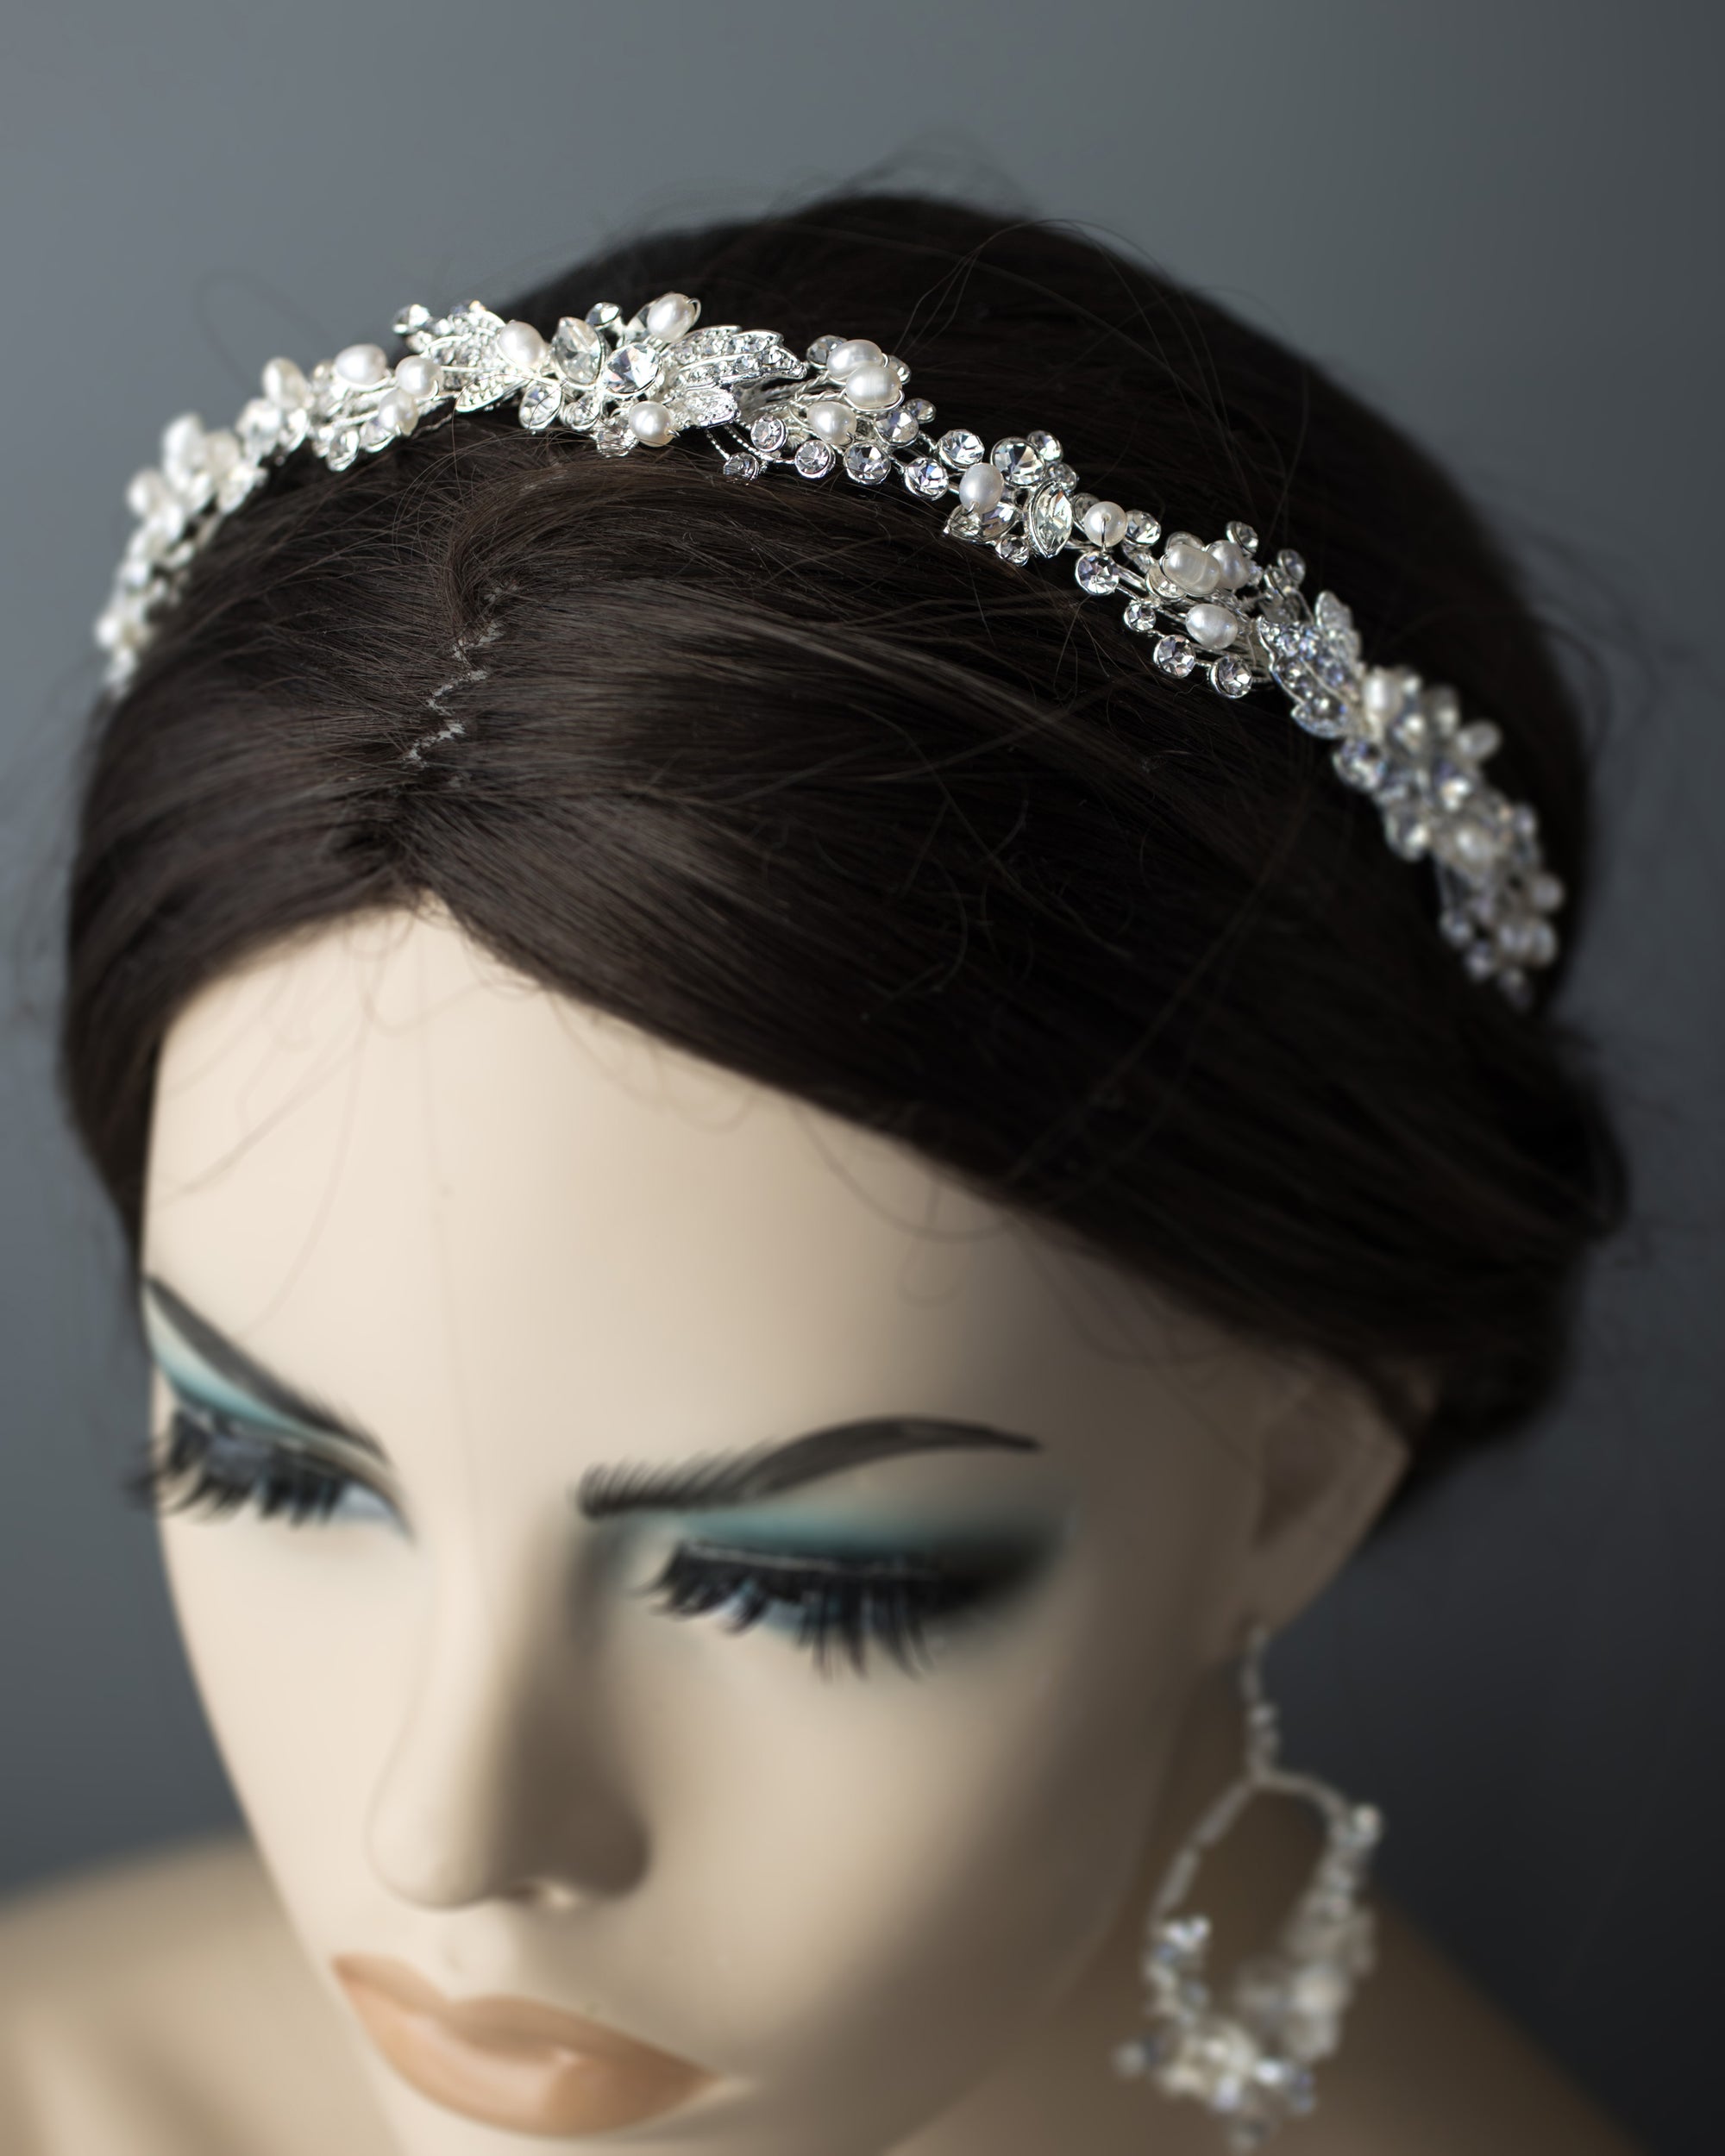 Bridal Headpiece of Crystals and Freshwater Pearls - Cassandra Lynne